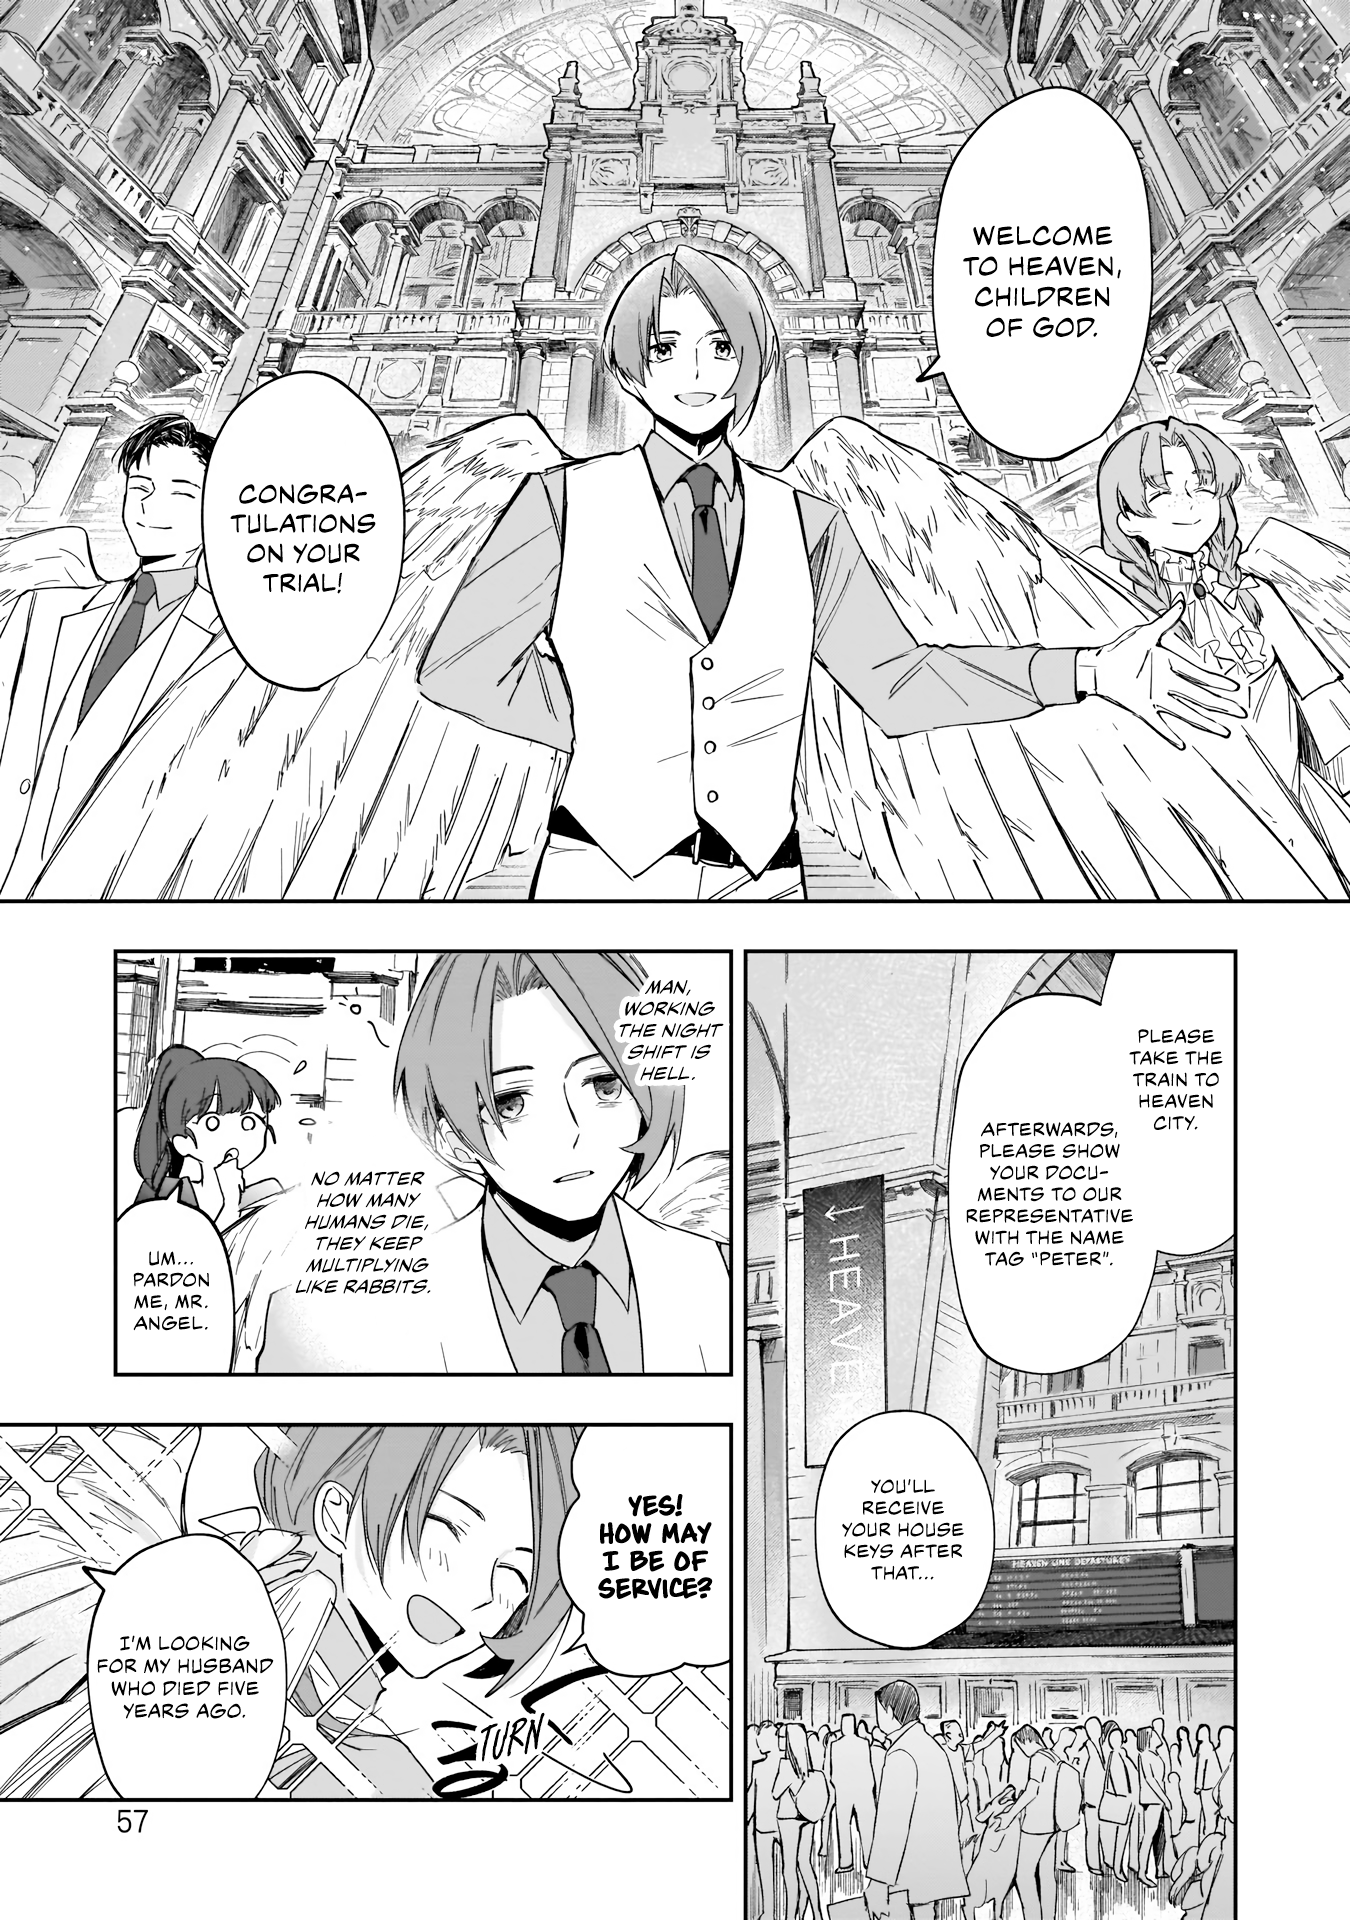 The Boy Of Alba And The Queen Of Hell Vol.1 Chapter 2 - Picture 3